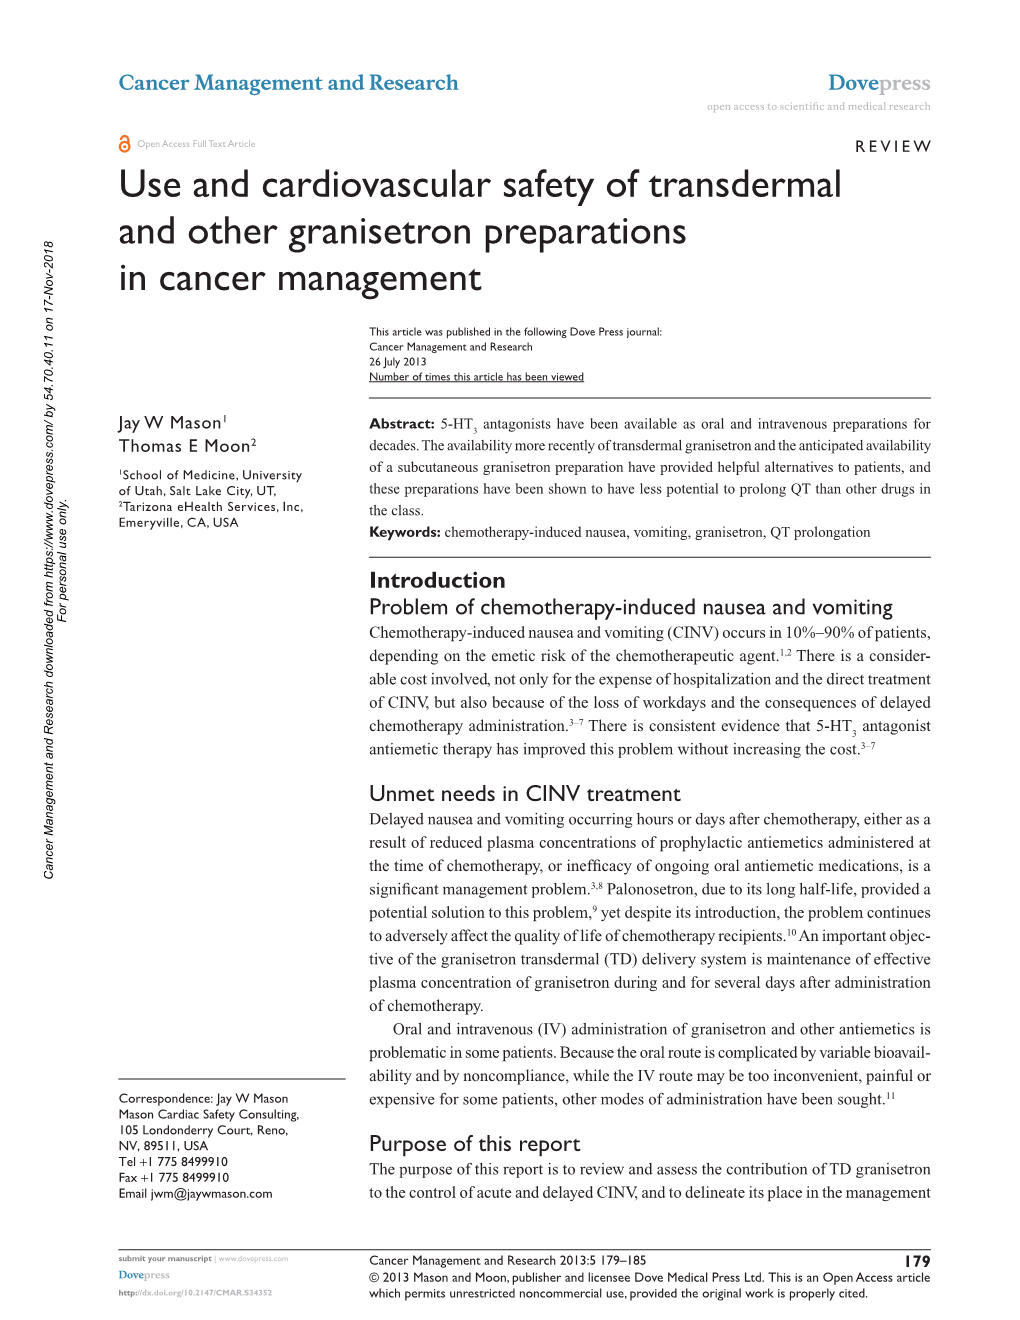 Use and Cardiovascular Safety of Transdermal and Other Granisetron Preparations in Cancer Management